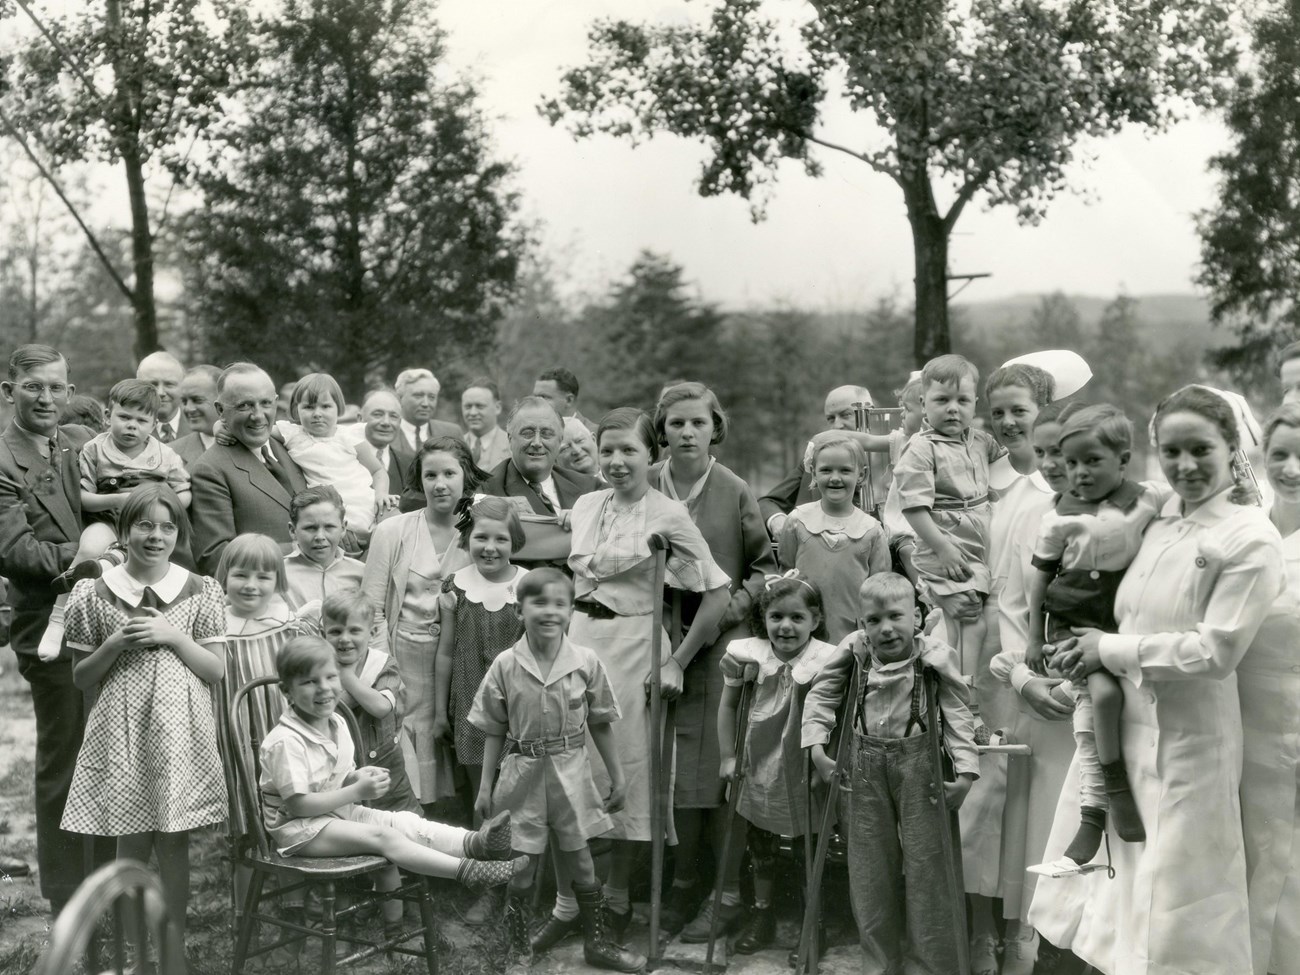 FDR surrounded by a group of children and adults, some supporting themselves with crutches.